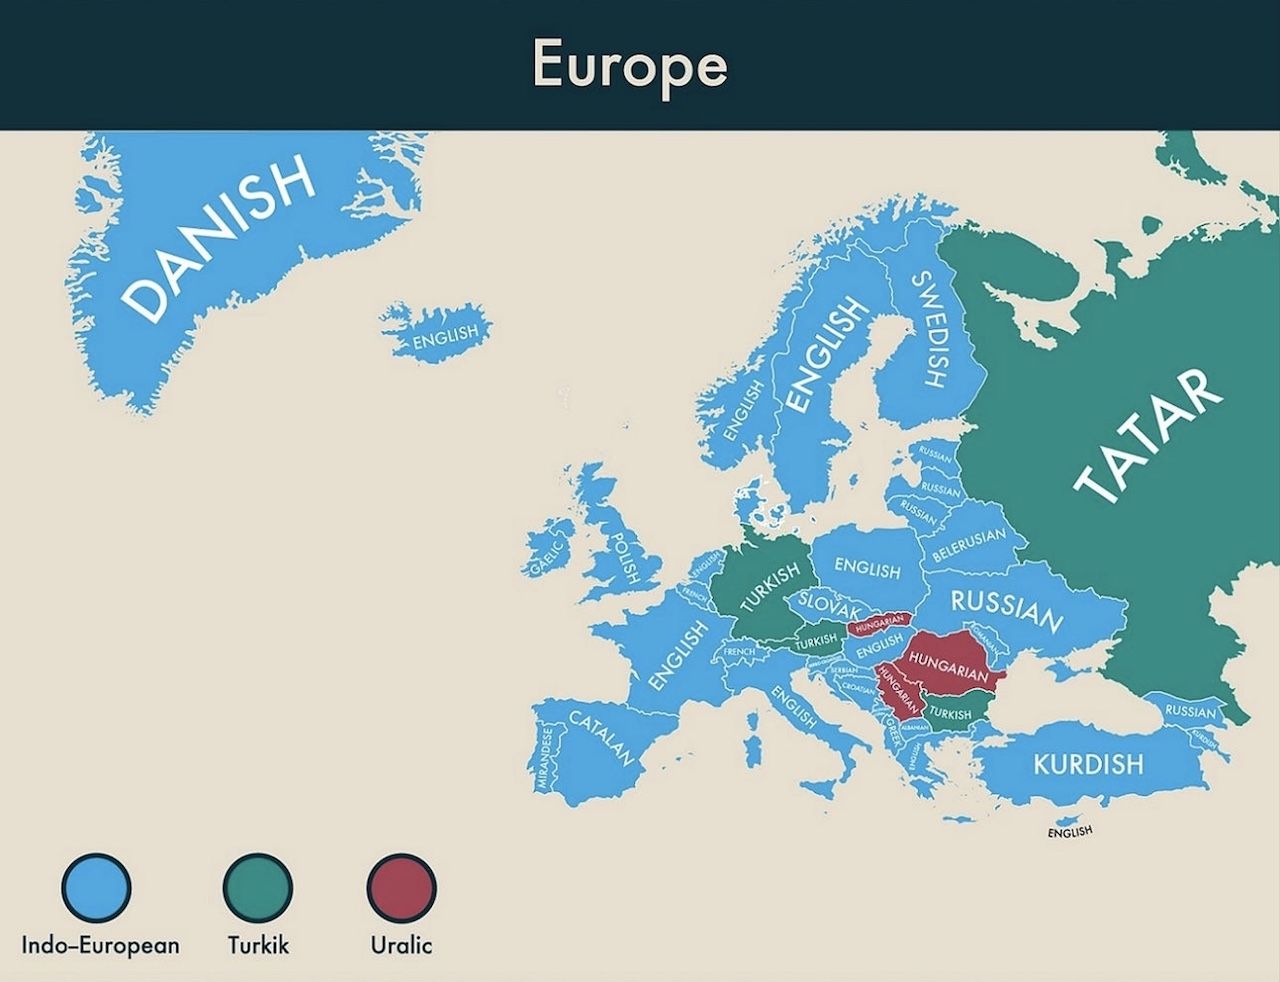 Europe most commonly spoken second language